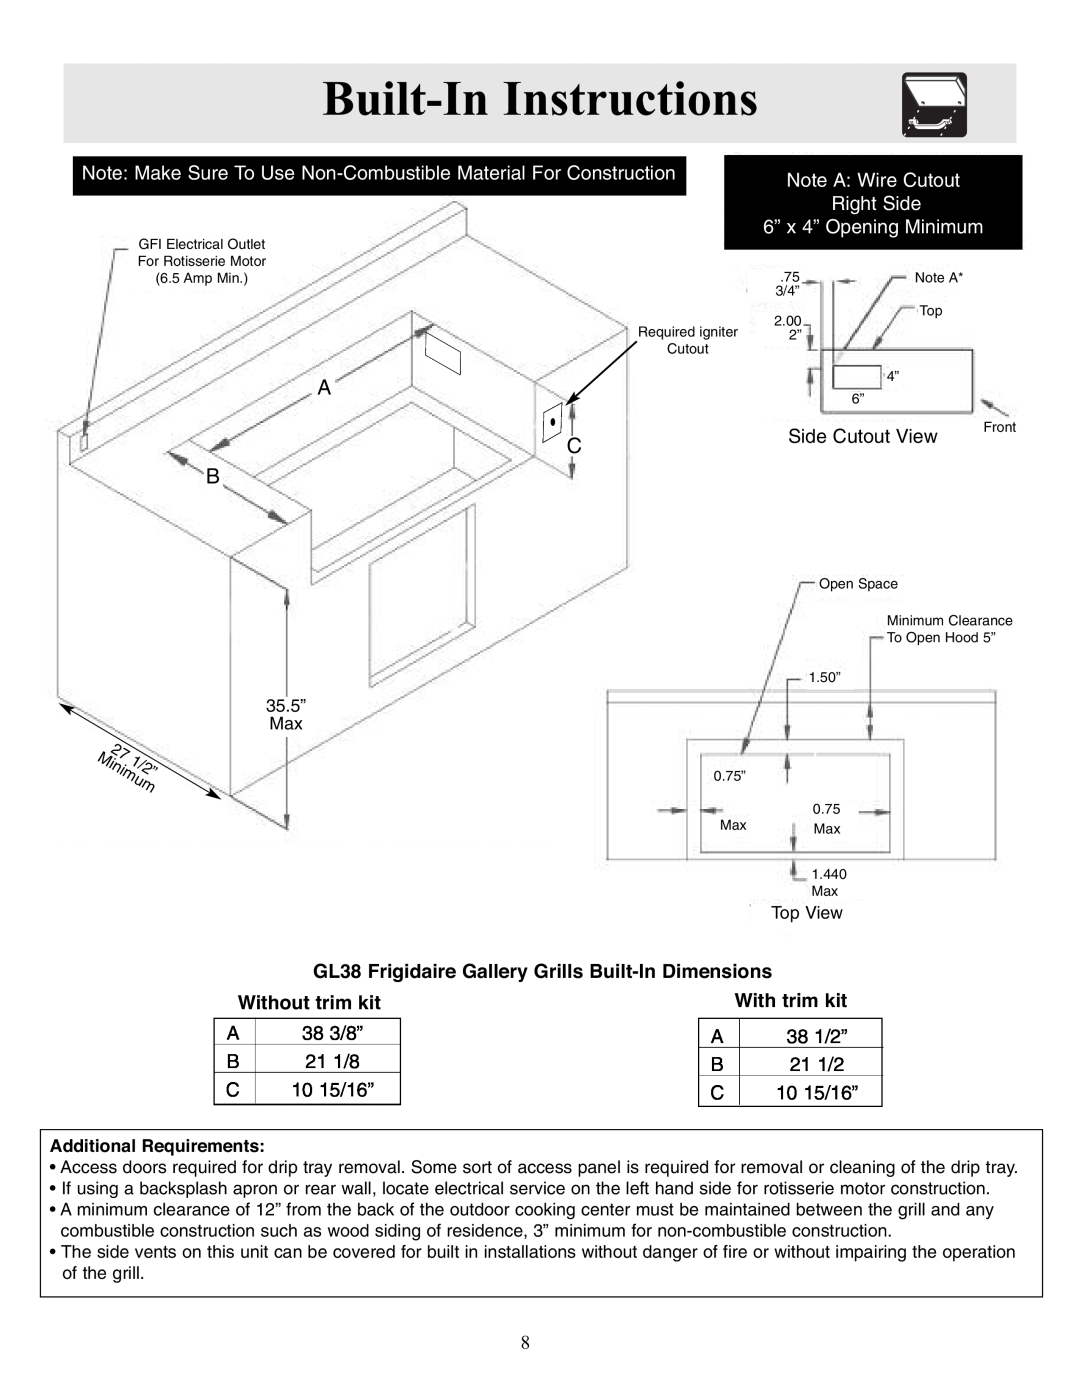 Frigidaire Outdoor Grill with Electronic Ignition warranty Built-InInstructions 